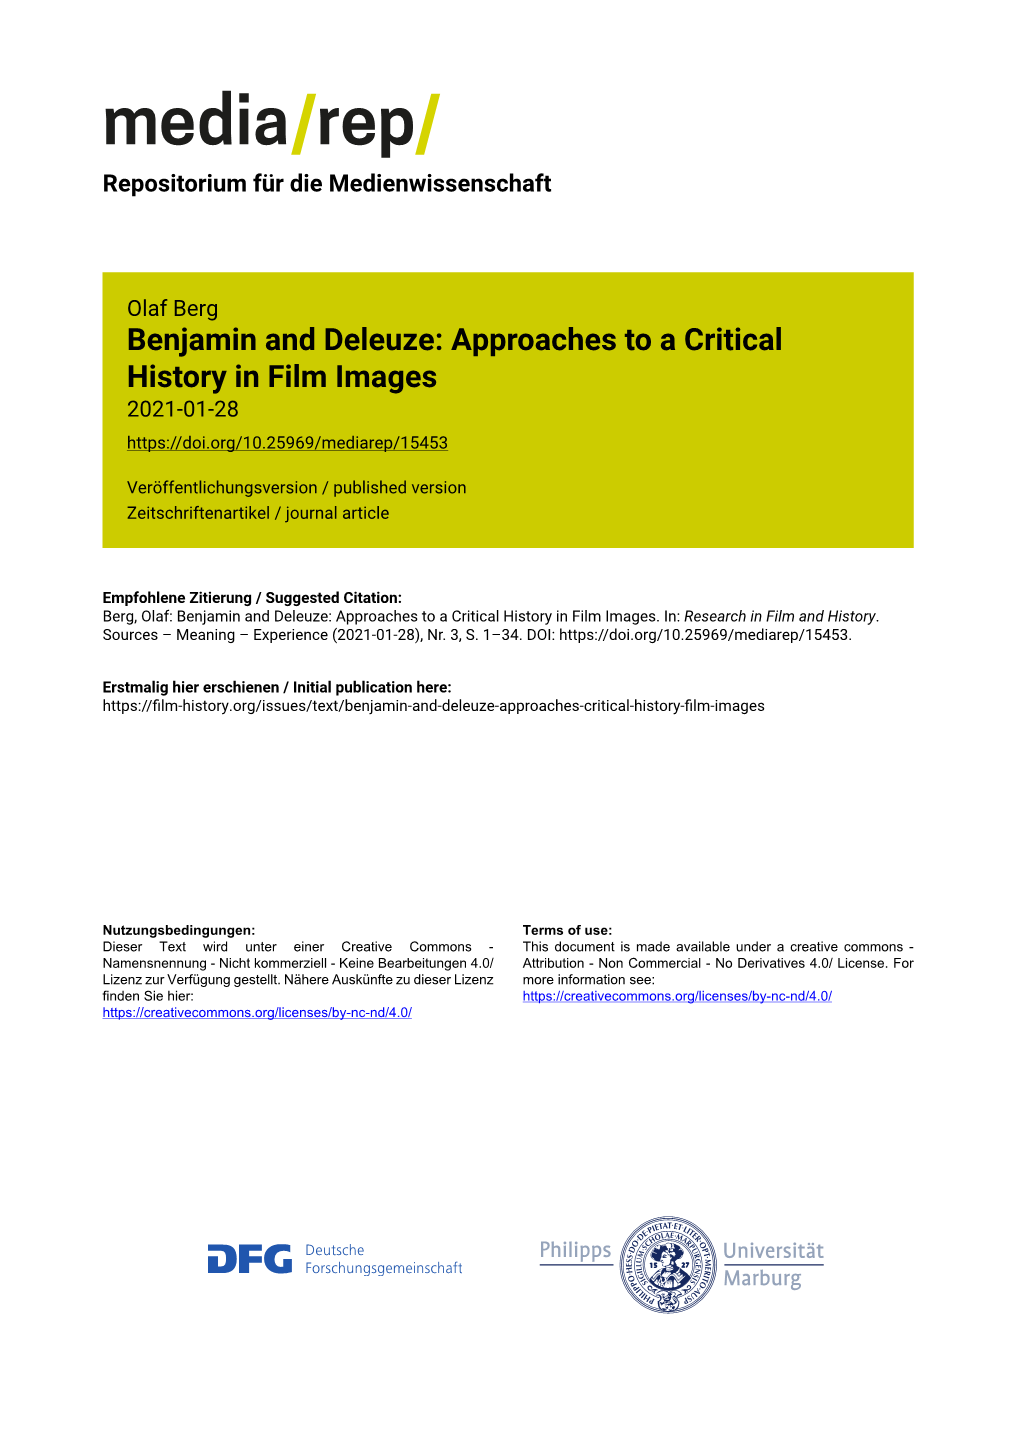 Benjamin and Deleuze: Approaches to a Critical History in Film Images 2021-01-28